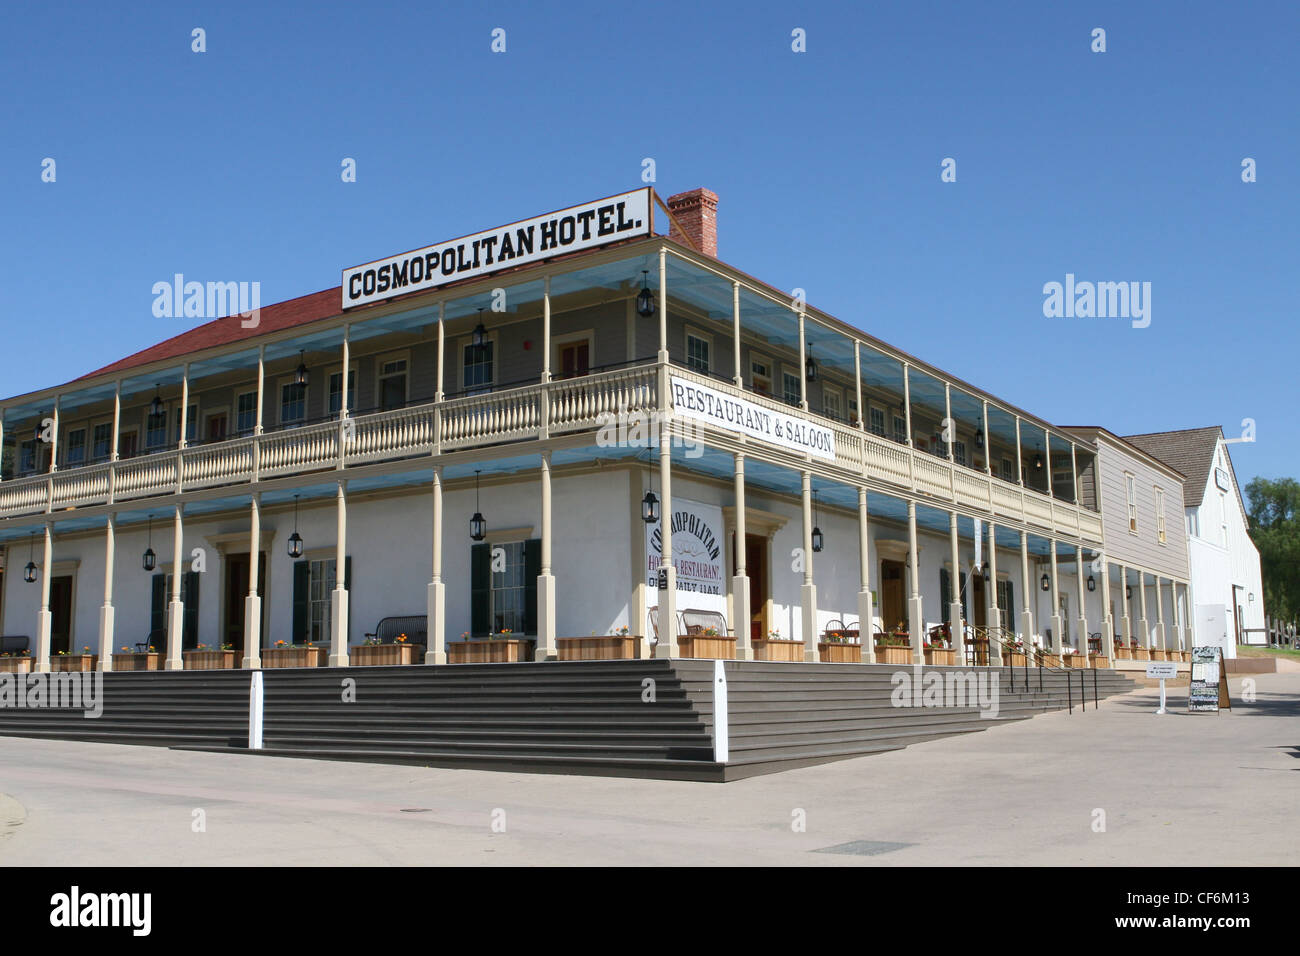 Hotel in Old Town in San Diego, California, USA Stock Photo